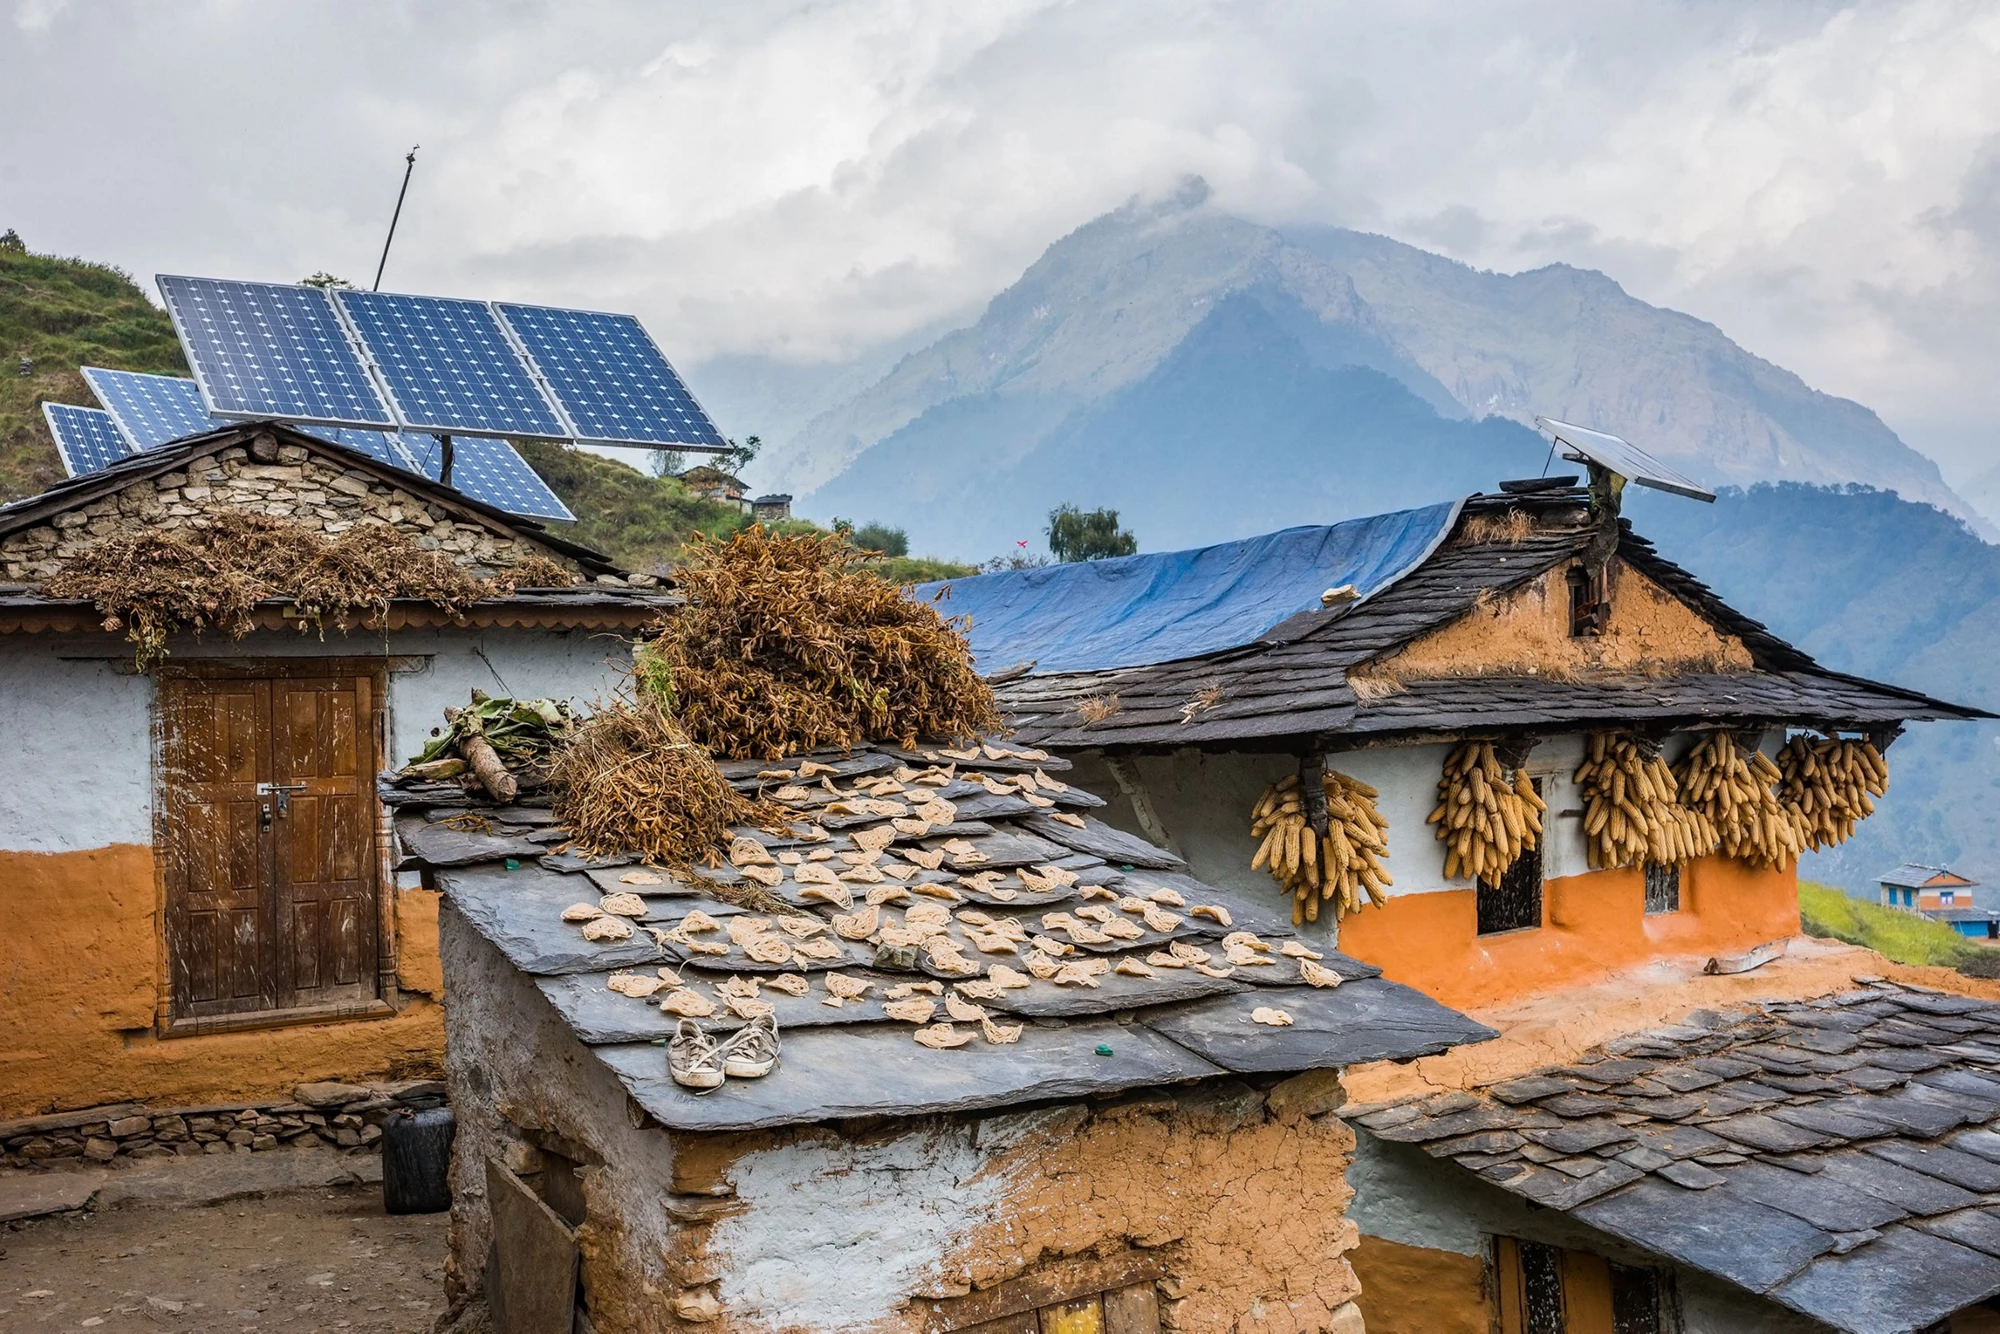 Nepali traditional houses with solar cell panel on the roof. Muri village, Dhaulagiri region, Nepal.